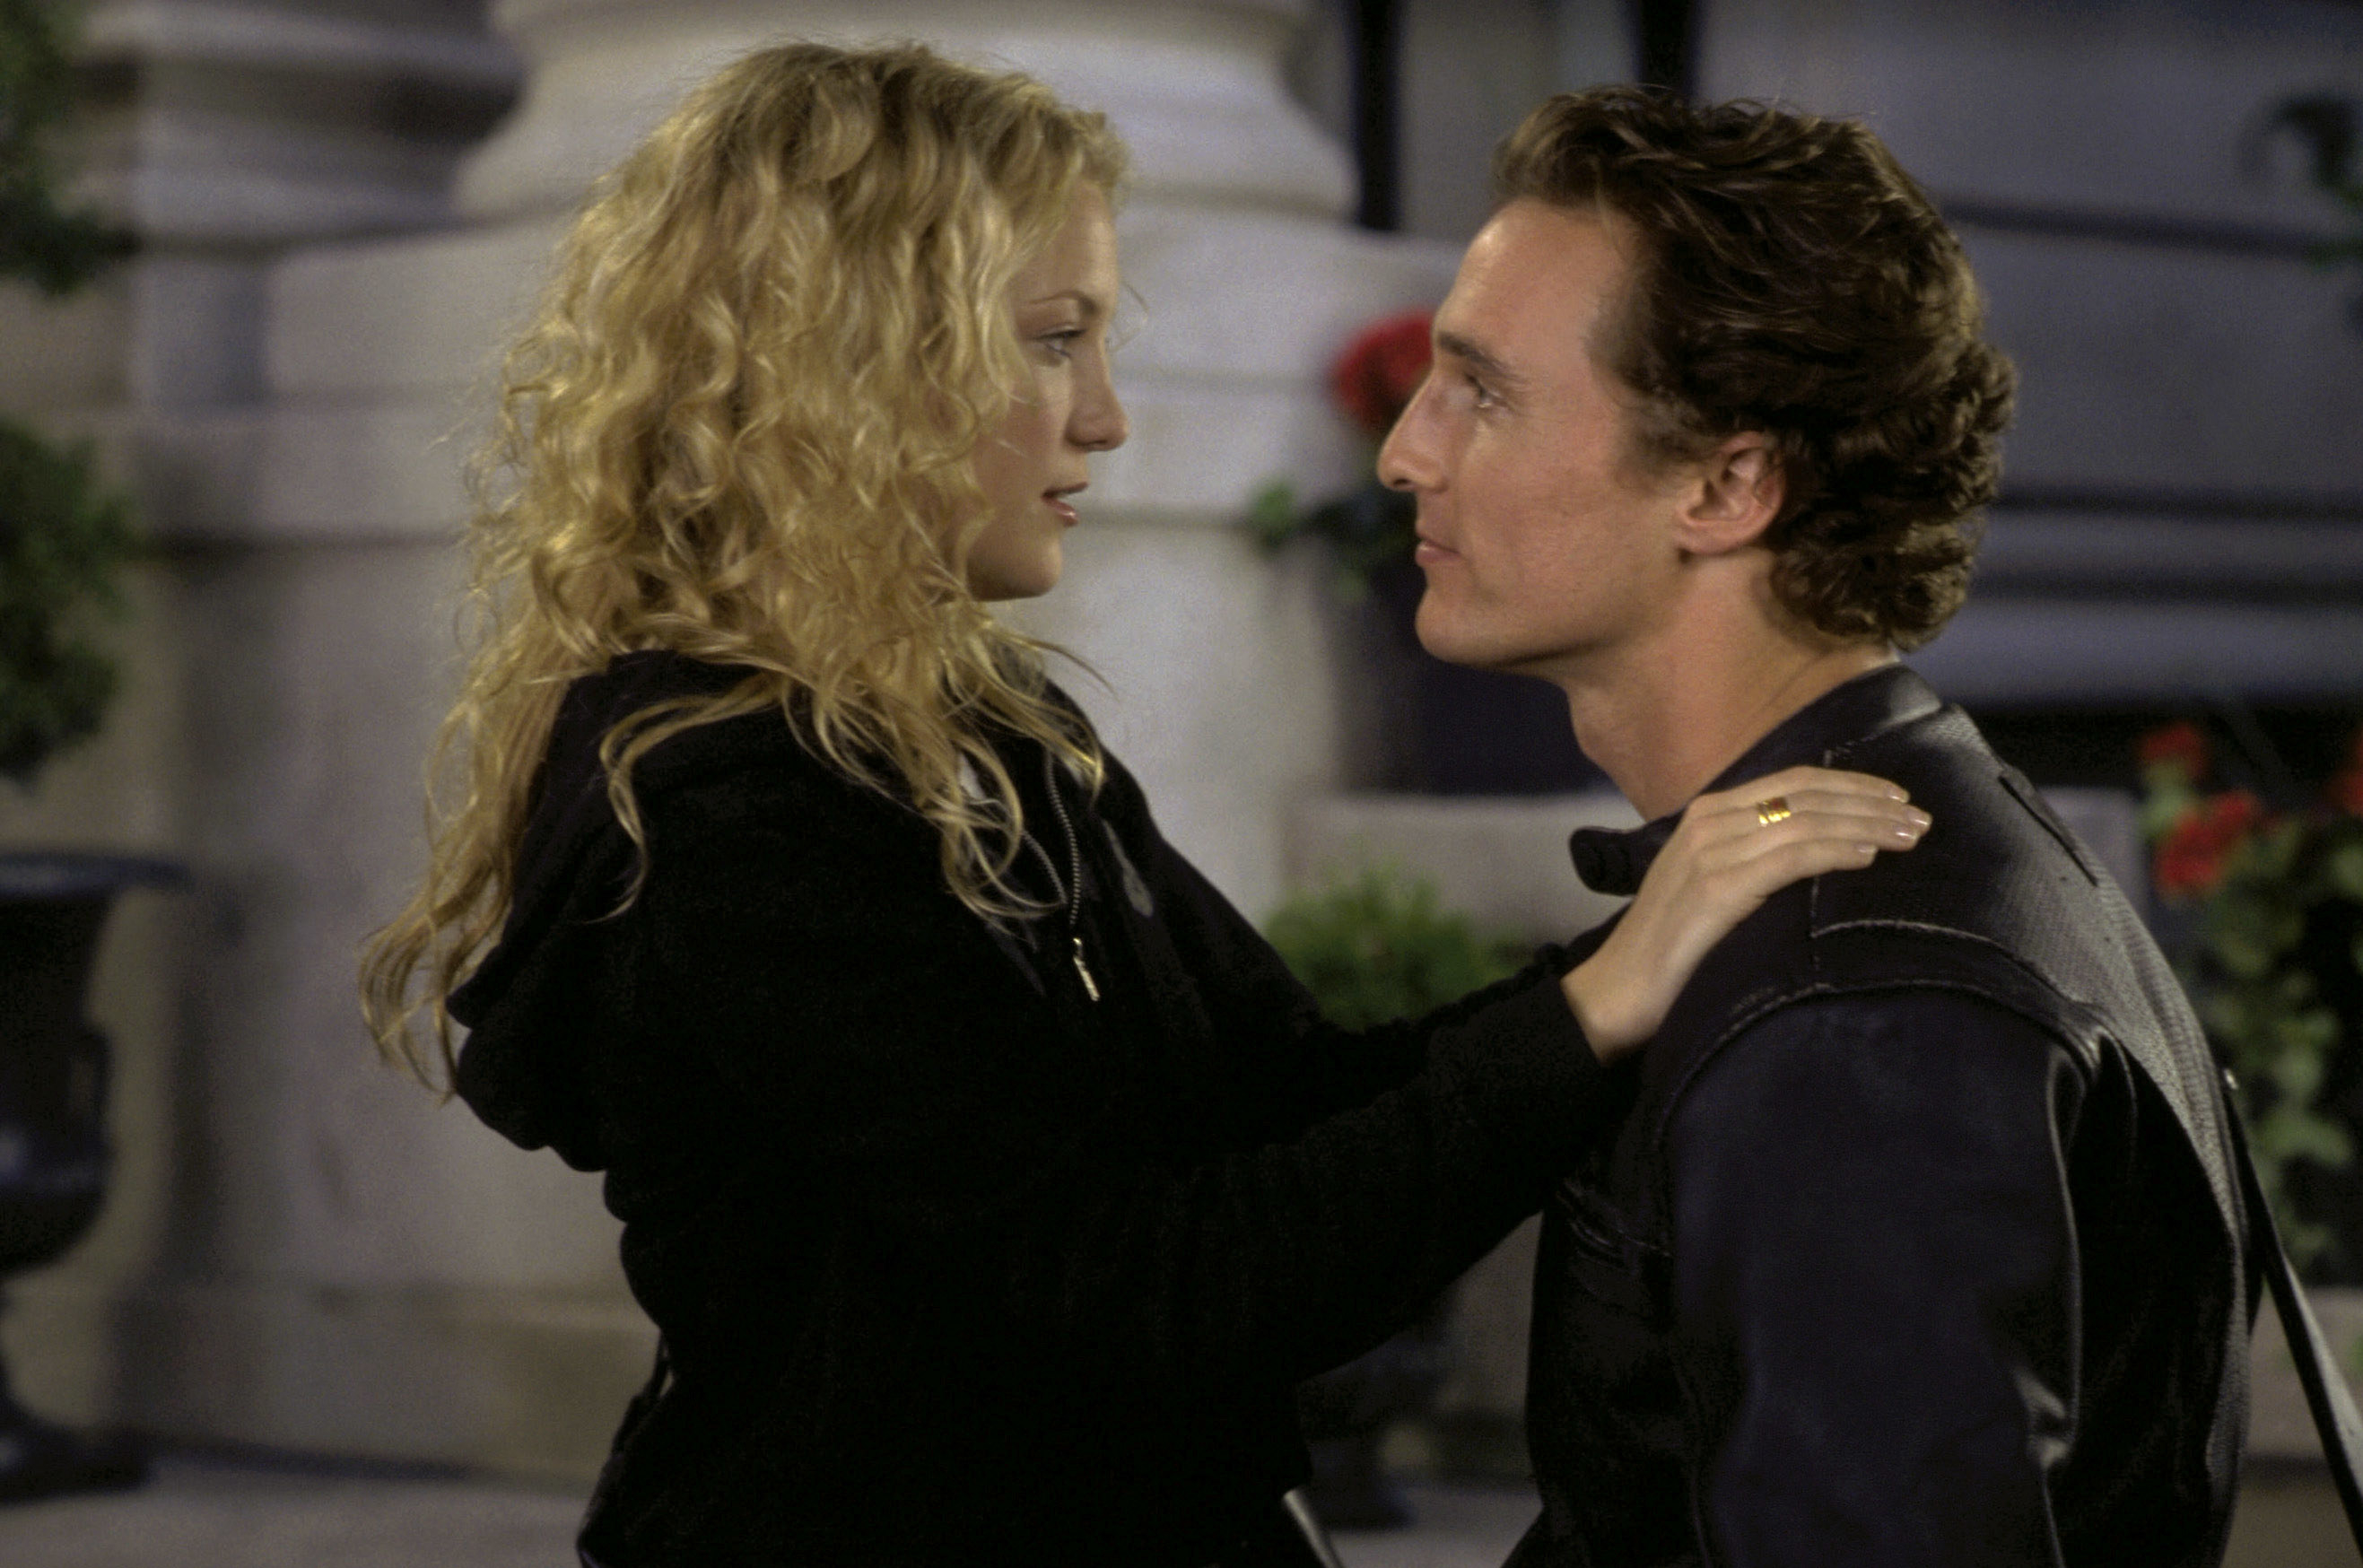 Kate Hudson and Matthew McConaughey looking into each others eyes in &quot;How to Lose a Guy in 10 Days&quot;